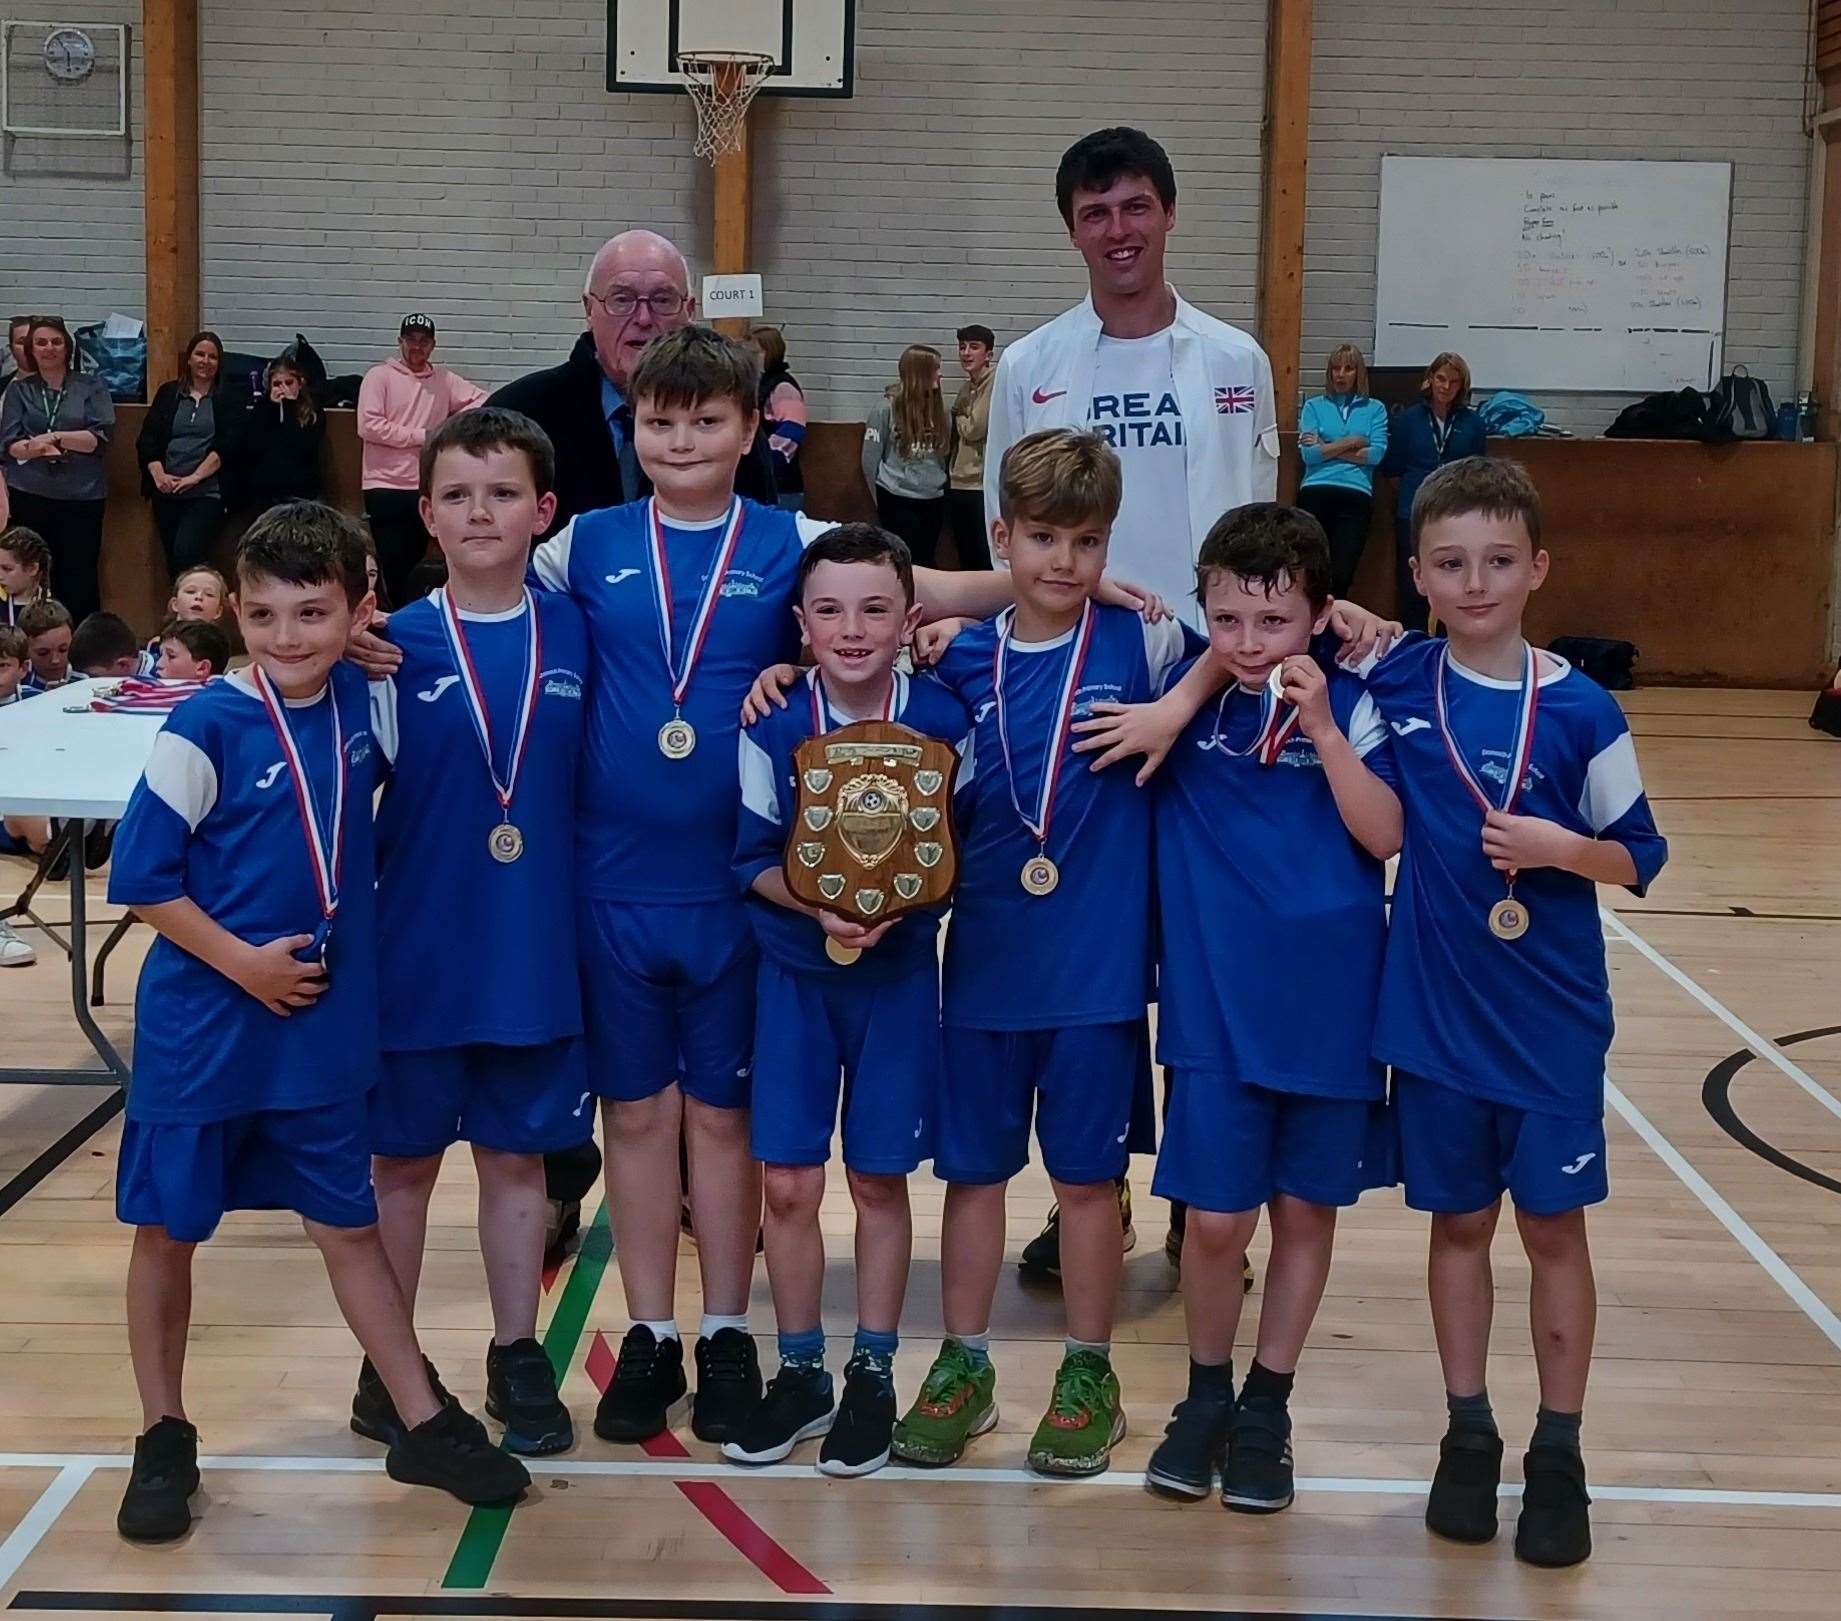 Smiles all round from the Dornoch team who won the Big Schools boys' category.